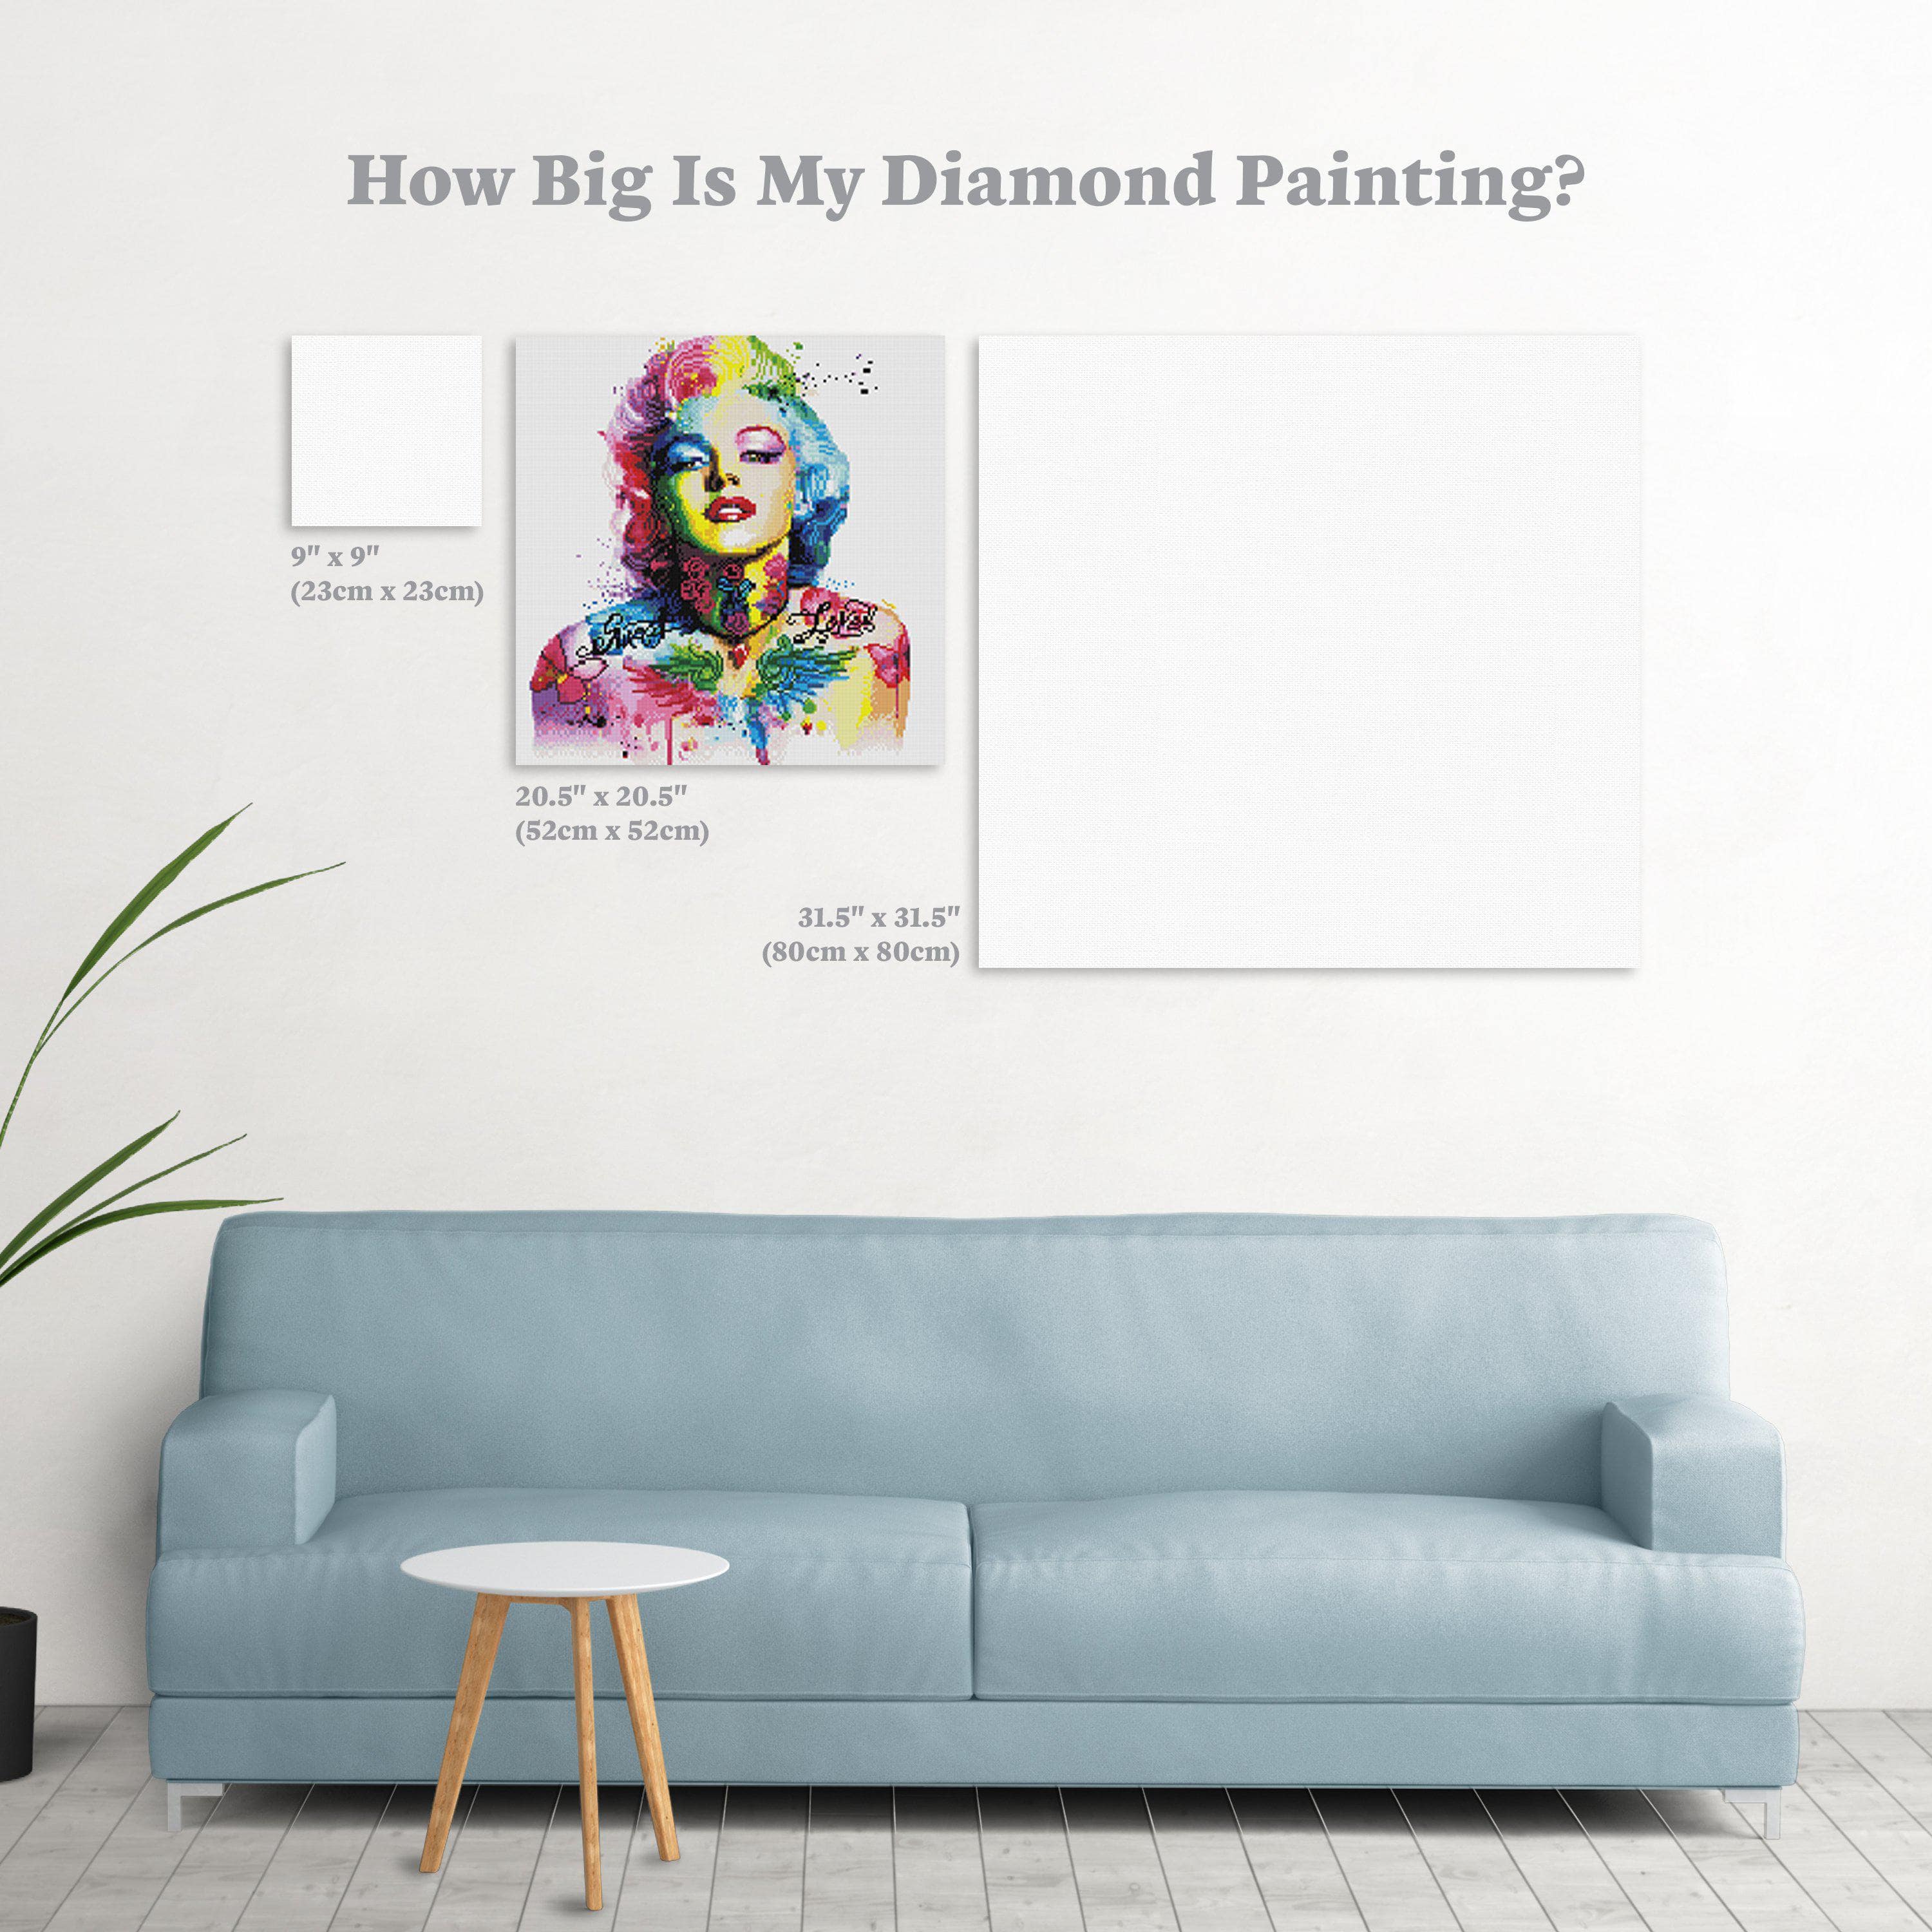  Modern Merch Marilyn Monroe Diamond Painting Kits for Adults,  Large DIY Marilyn Monroe Diamond Art, Arts and Crafts for Adults, Full  Round Drill 17x13 Paint by Numbers Marilyn Monroe Decor 